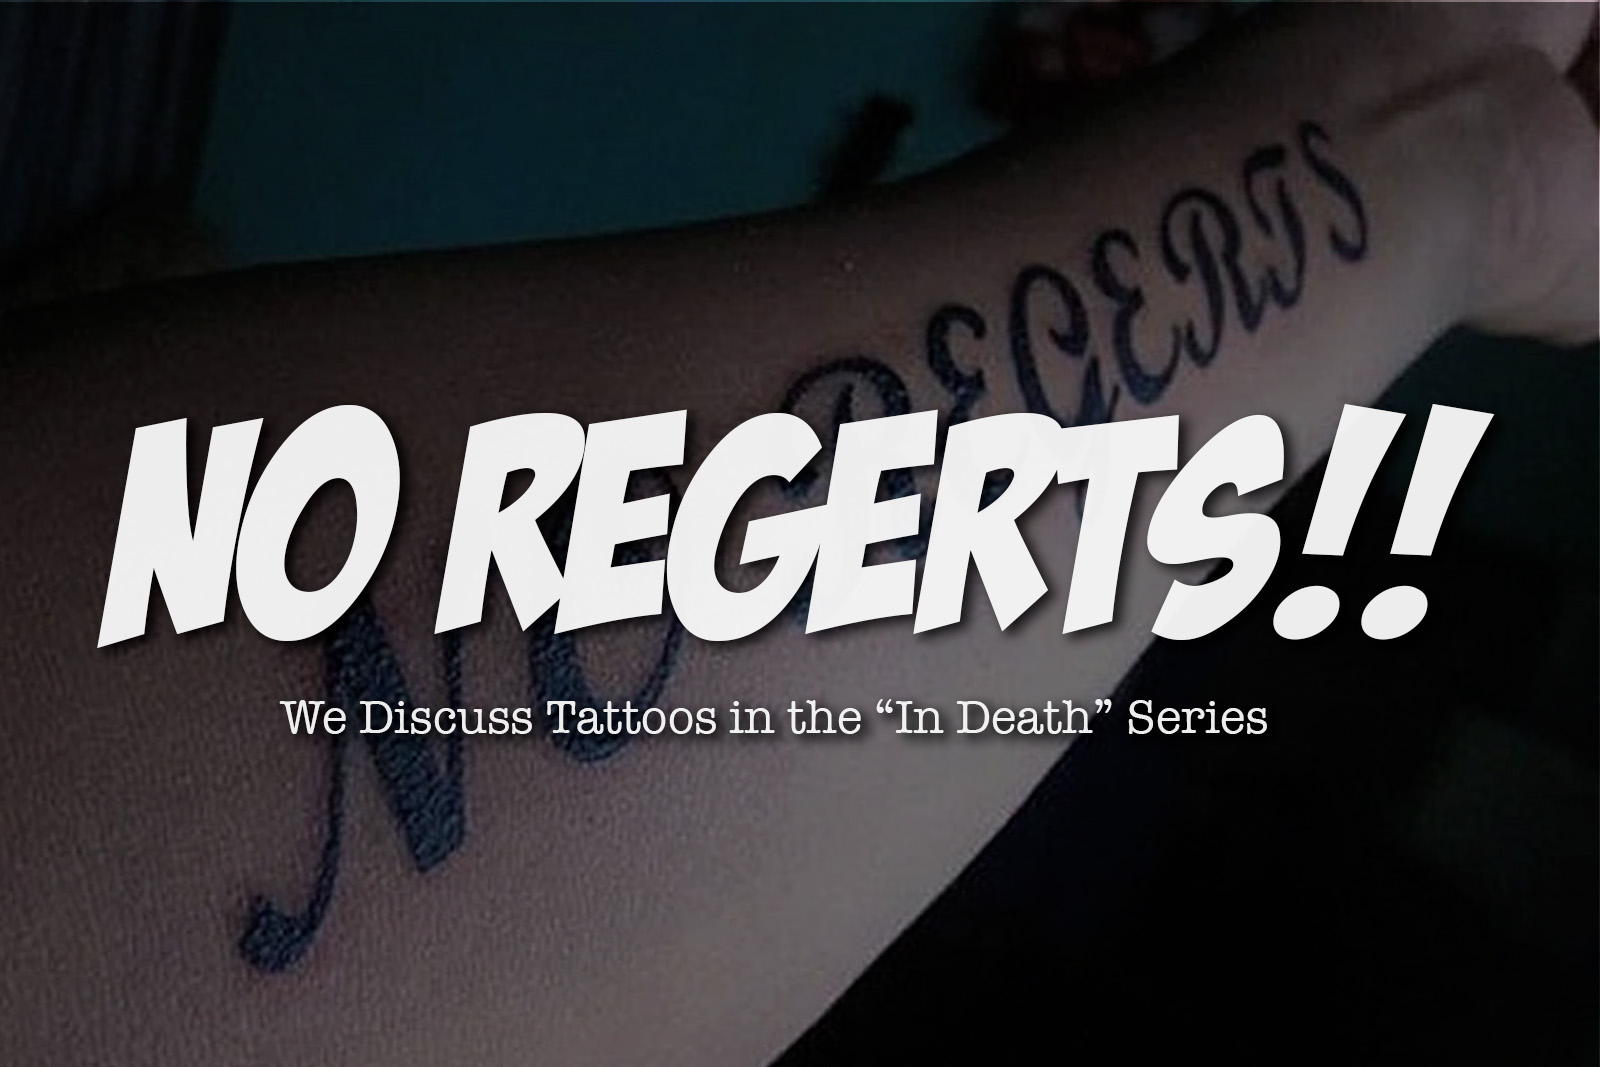 “No Regerts”: We Discuss Tattoos in the “In Death” Series